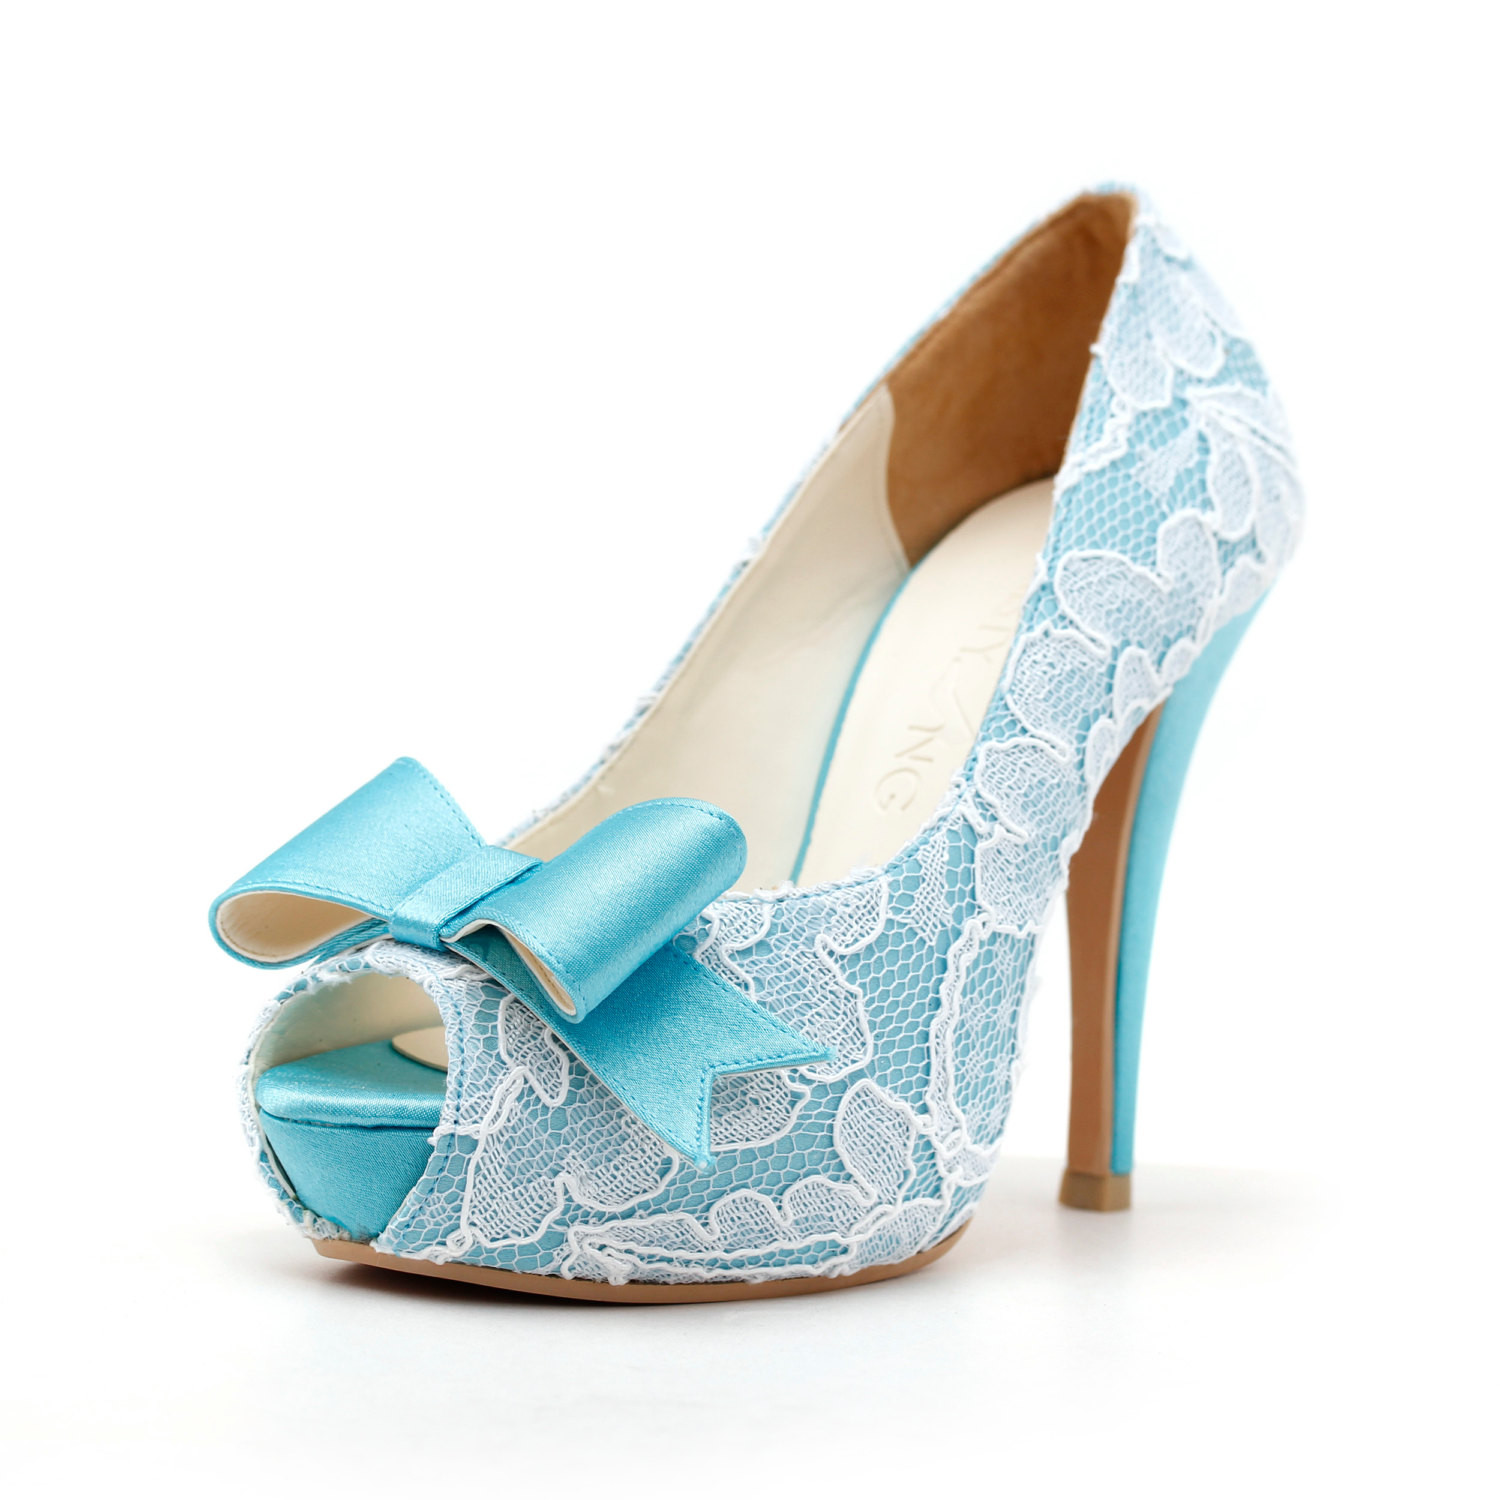 Blue Wedding Shoes For Bride
 Wedding Shoes For The Modern Day Bride